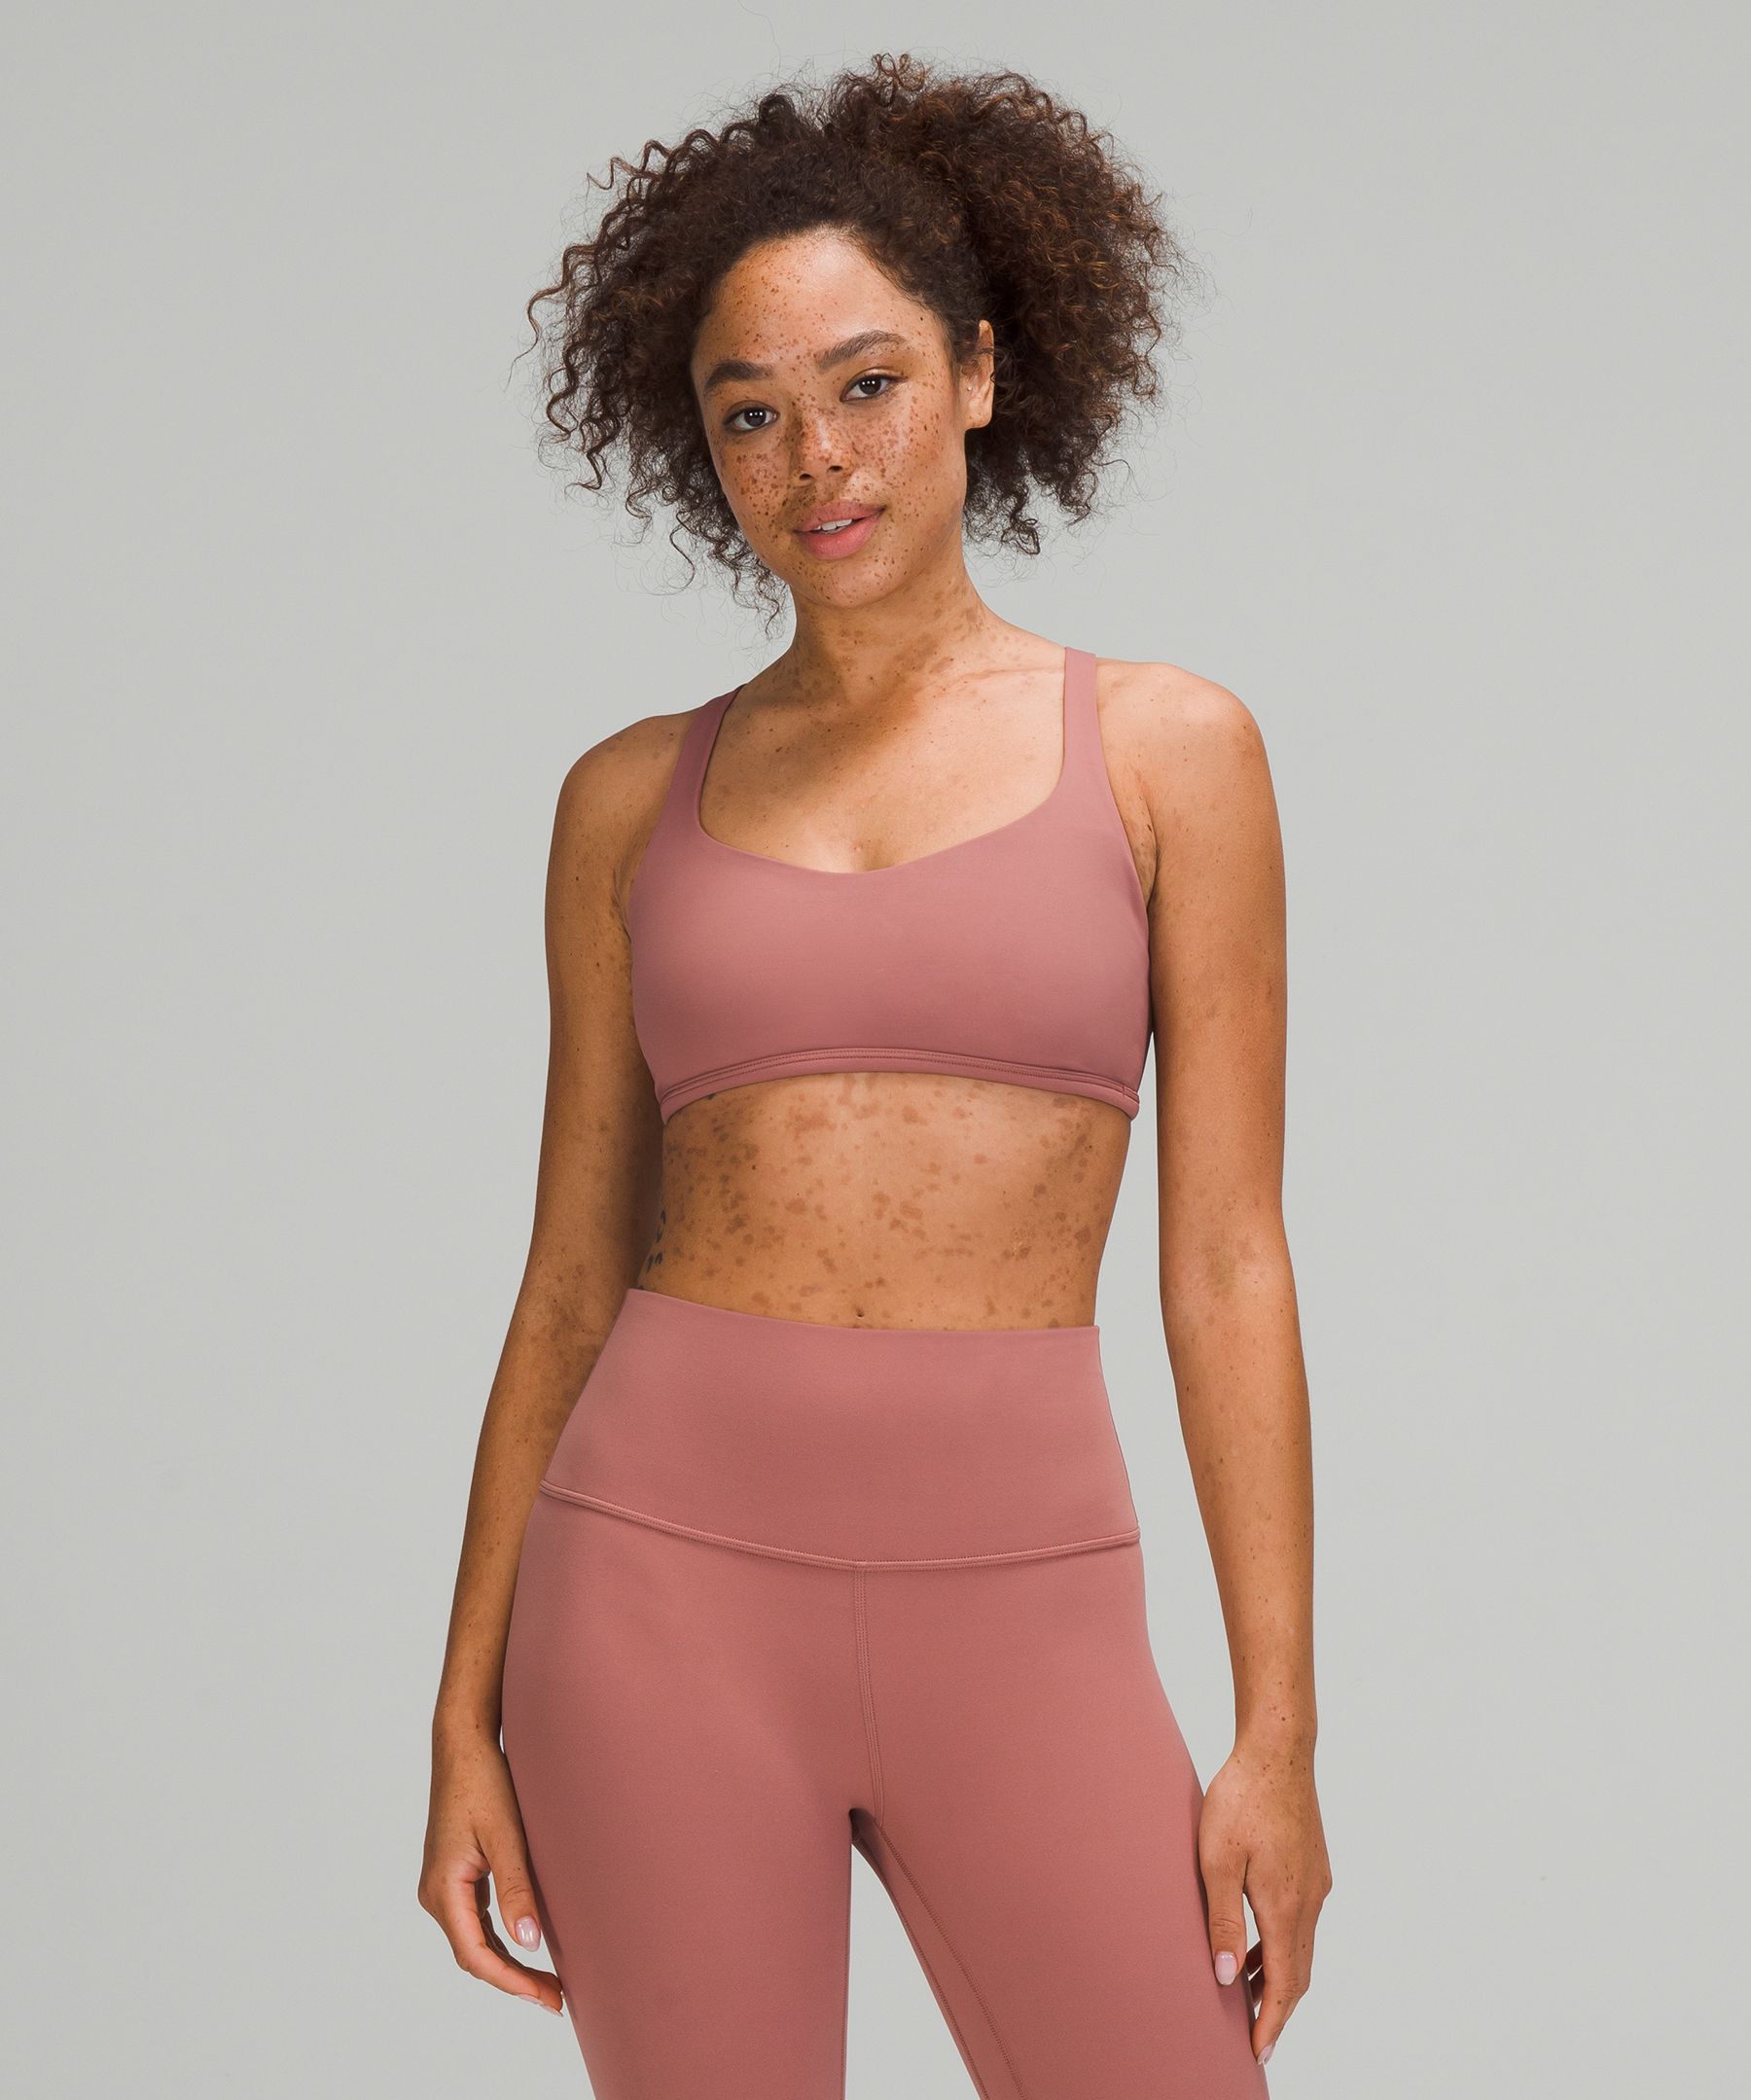 Lululemon Free to Be Bra - Wild *Light Support, A/B Cup - Ripened